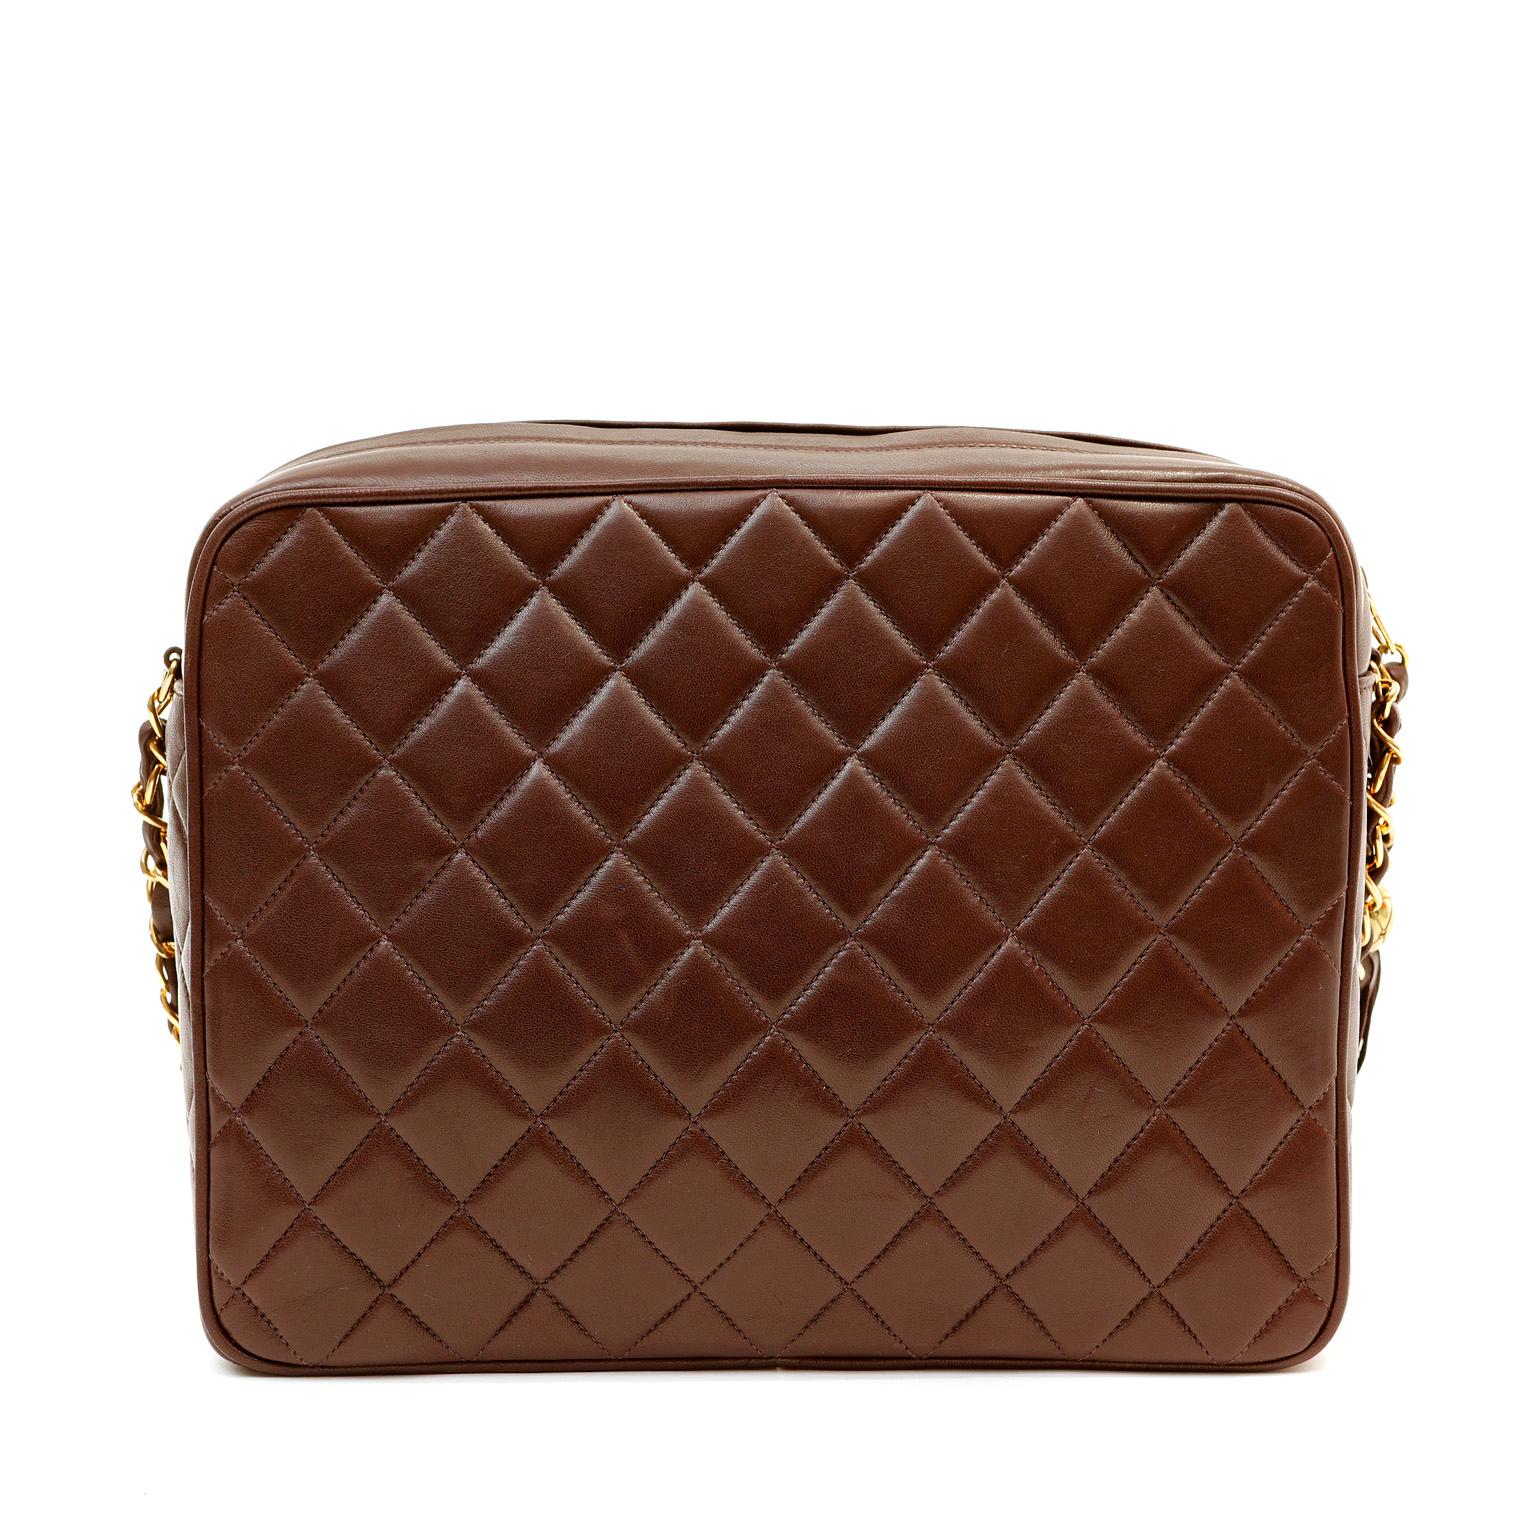 Chanel Brown Lambskin Vintage Camera Bag In Good Condition For Sale In Palm Beach, FL